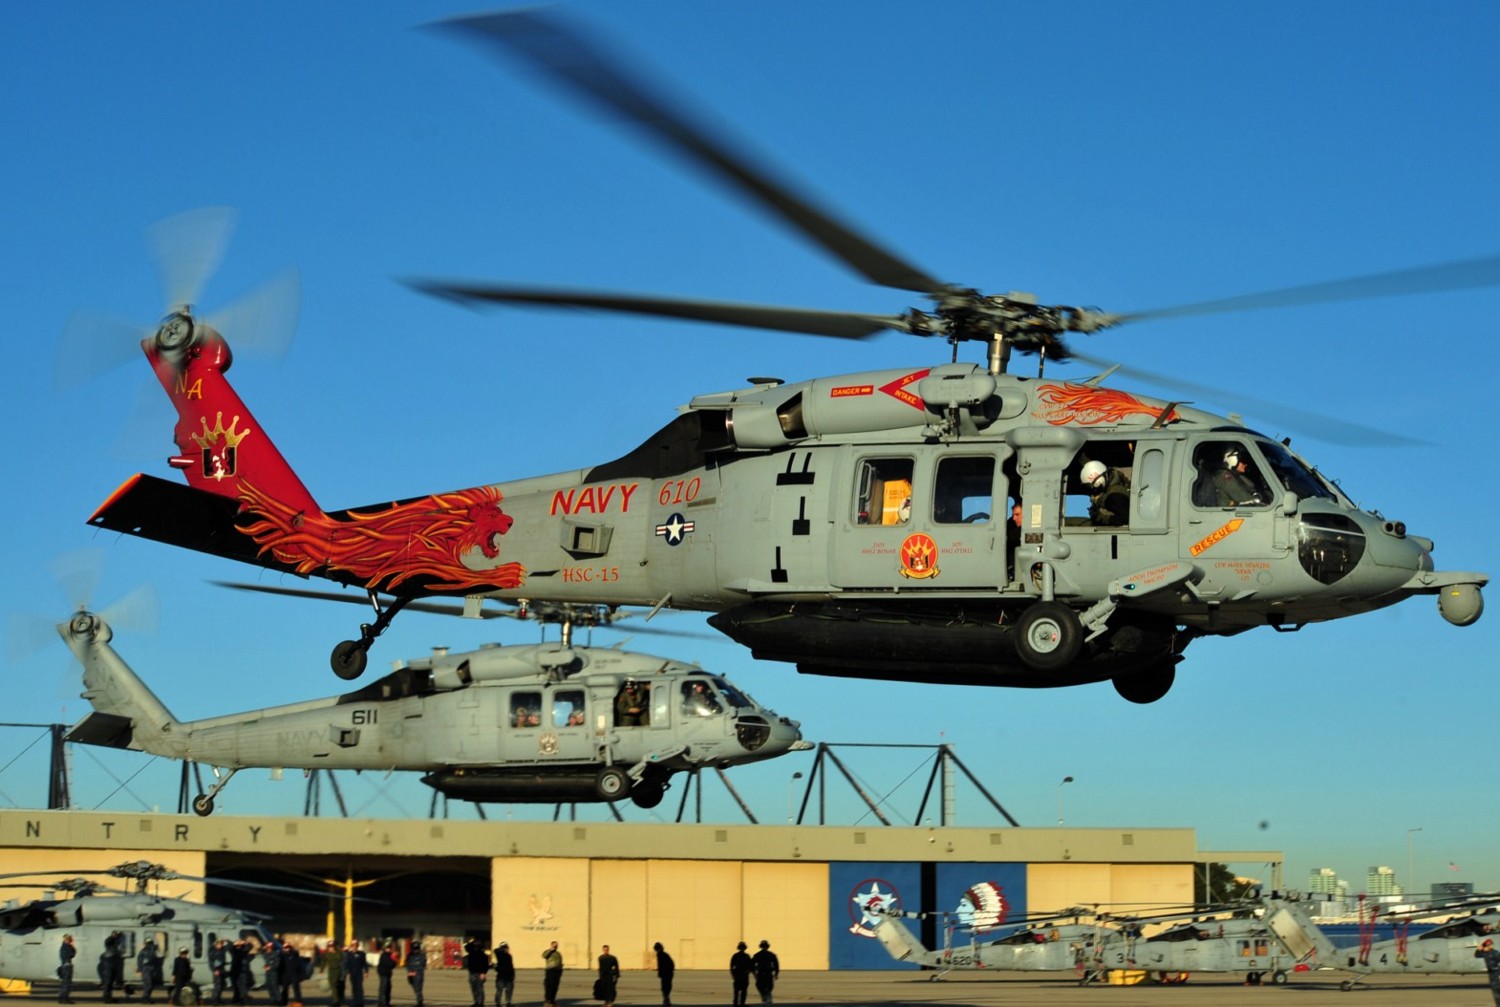 hsc-15 red lions helicopter sea combat squadron us navy mh-60s seahawk 03